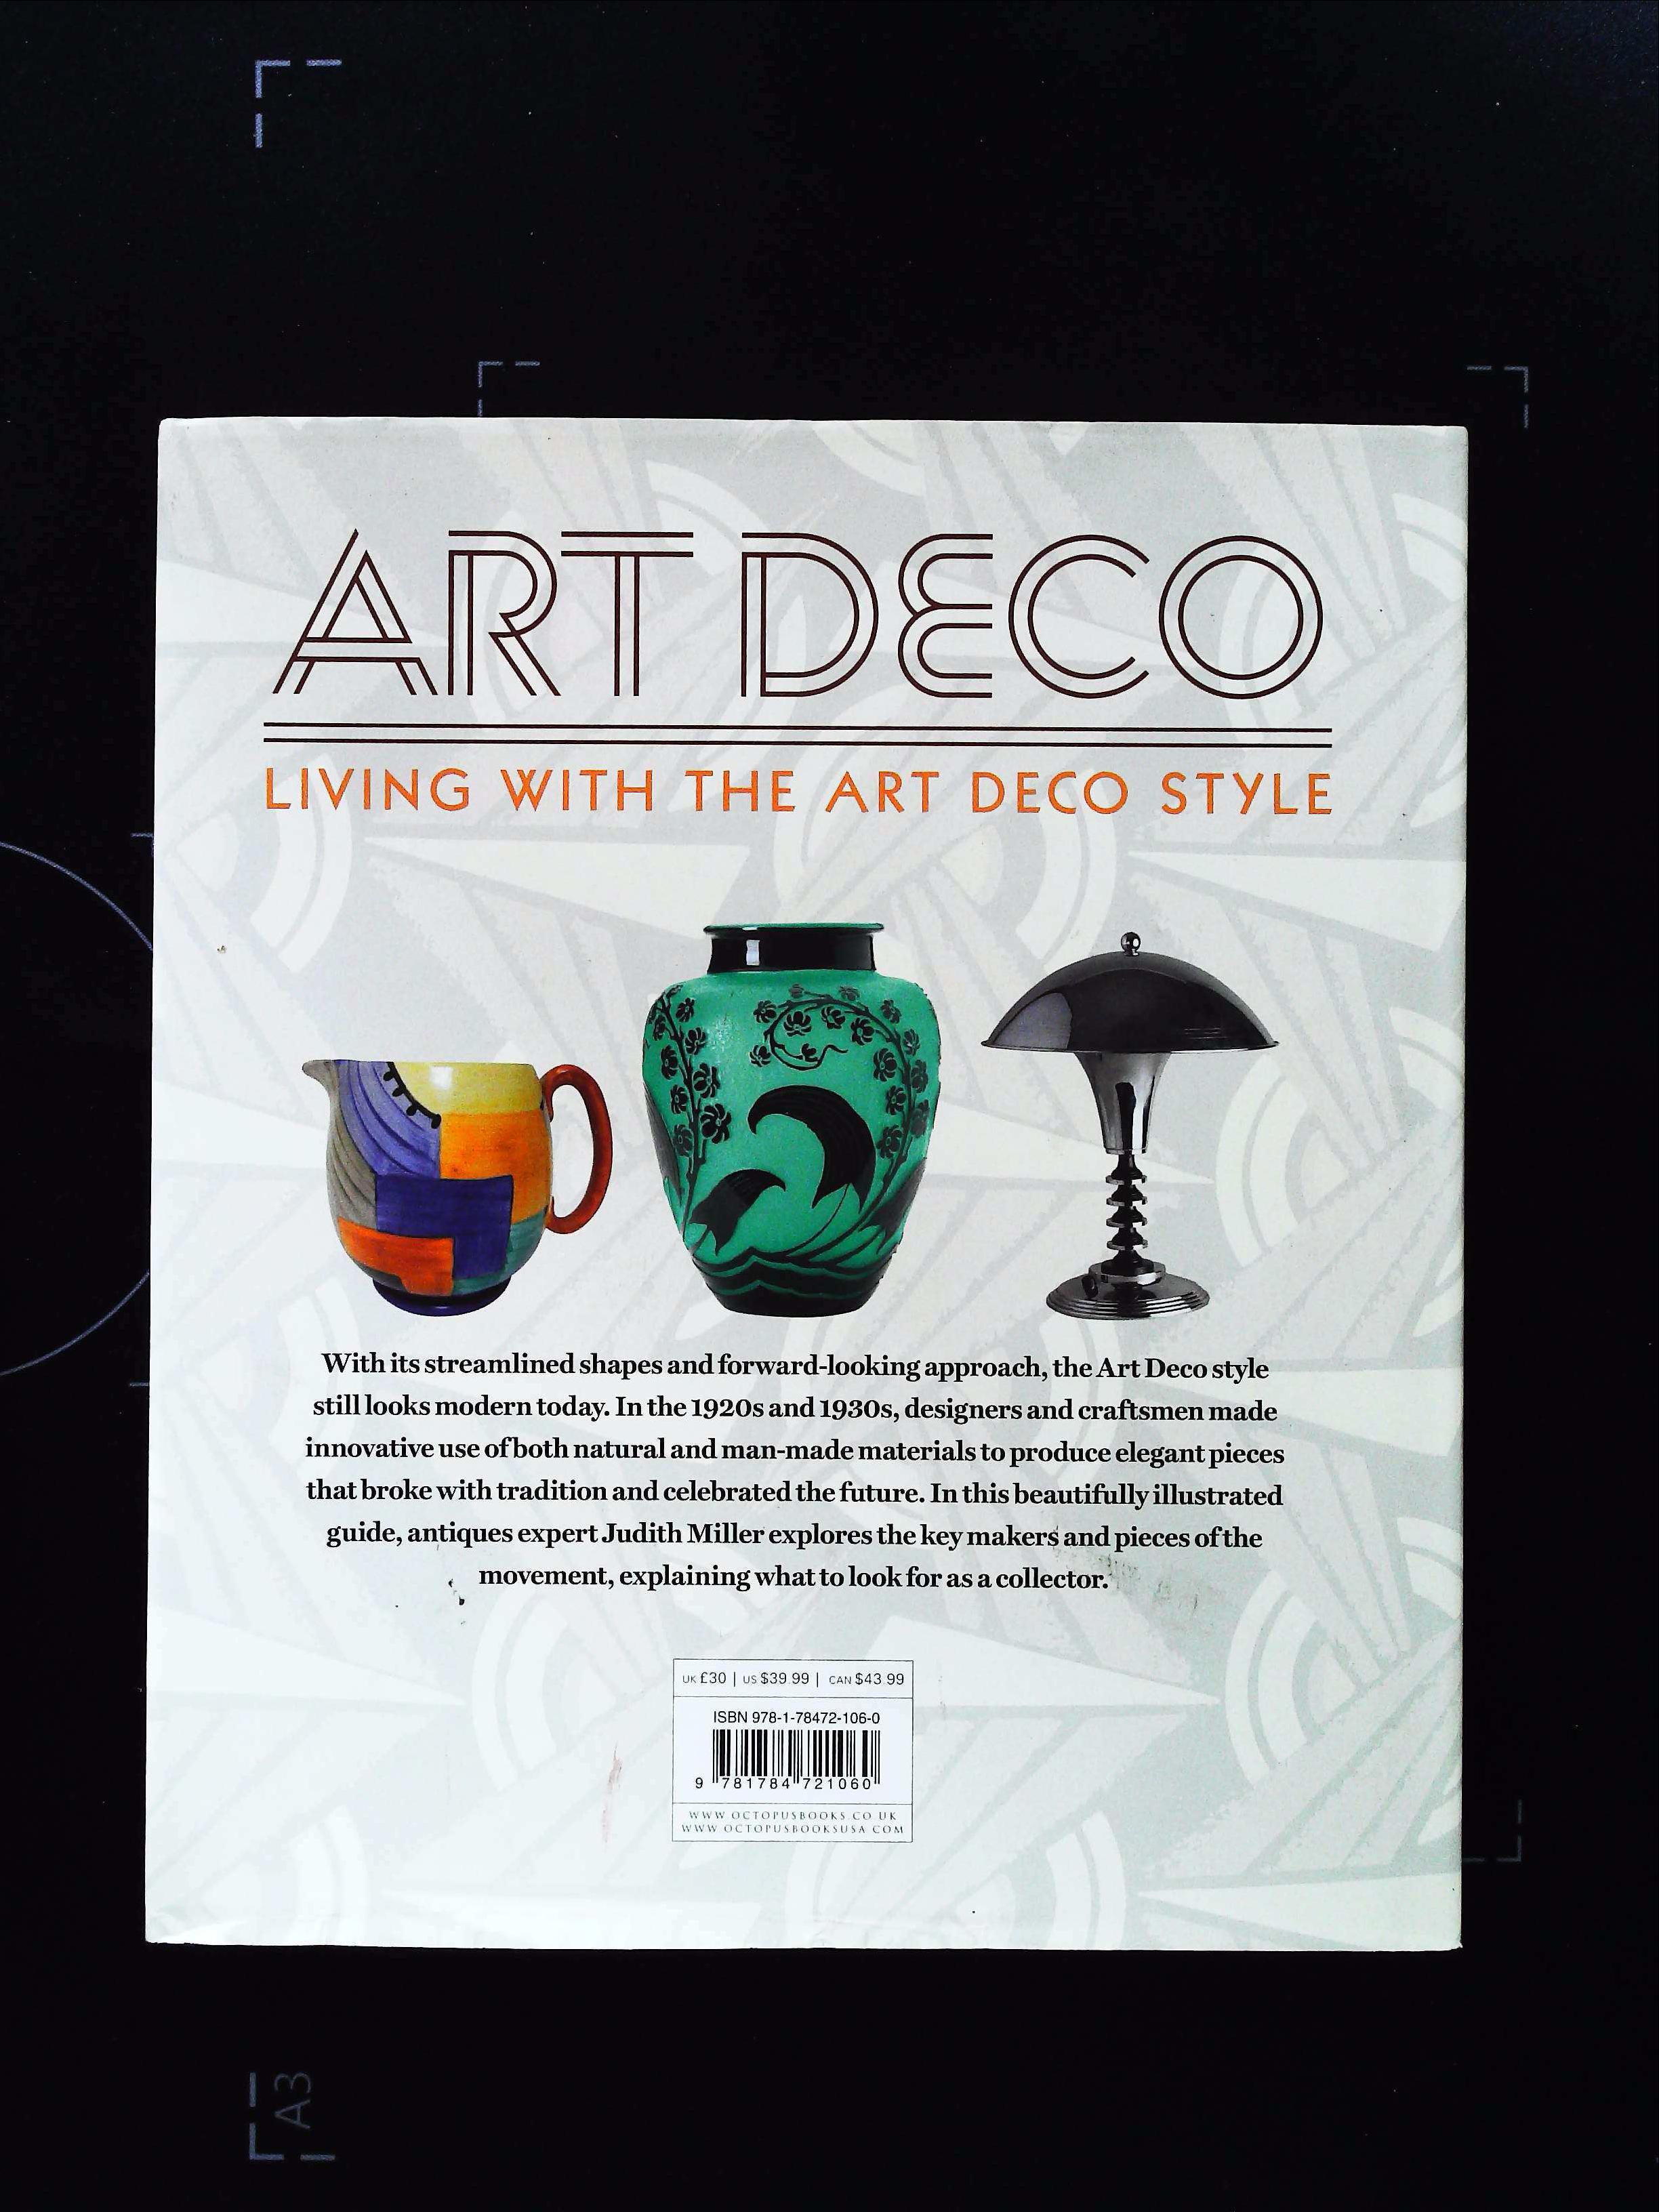 Art Deco Living With The Art Deco Style hardback book by Hudith Miller. Published 2016 Miller's. - Image 2 of 3